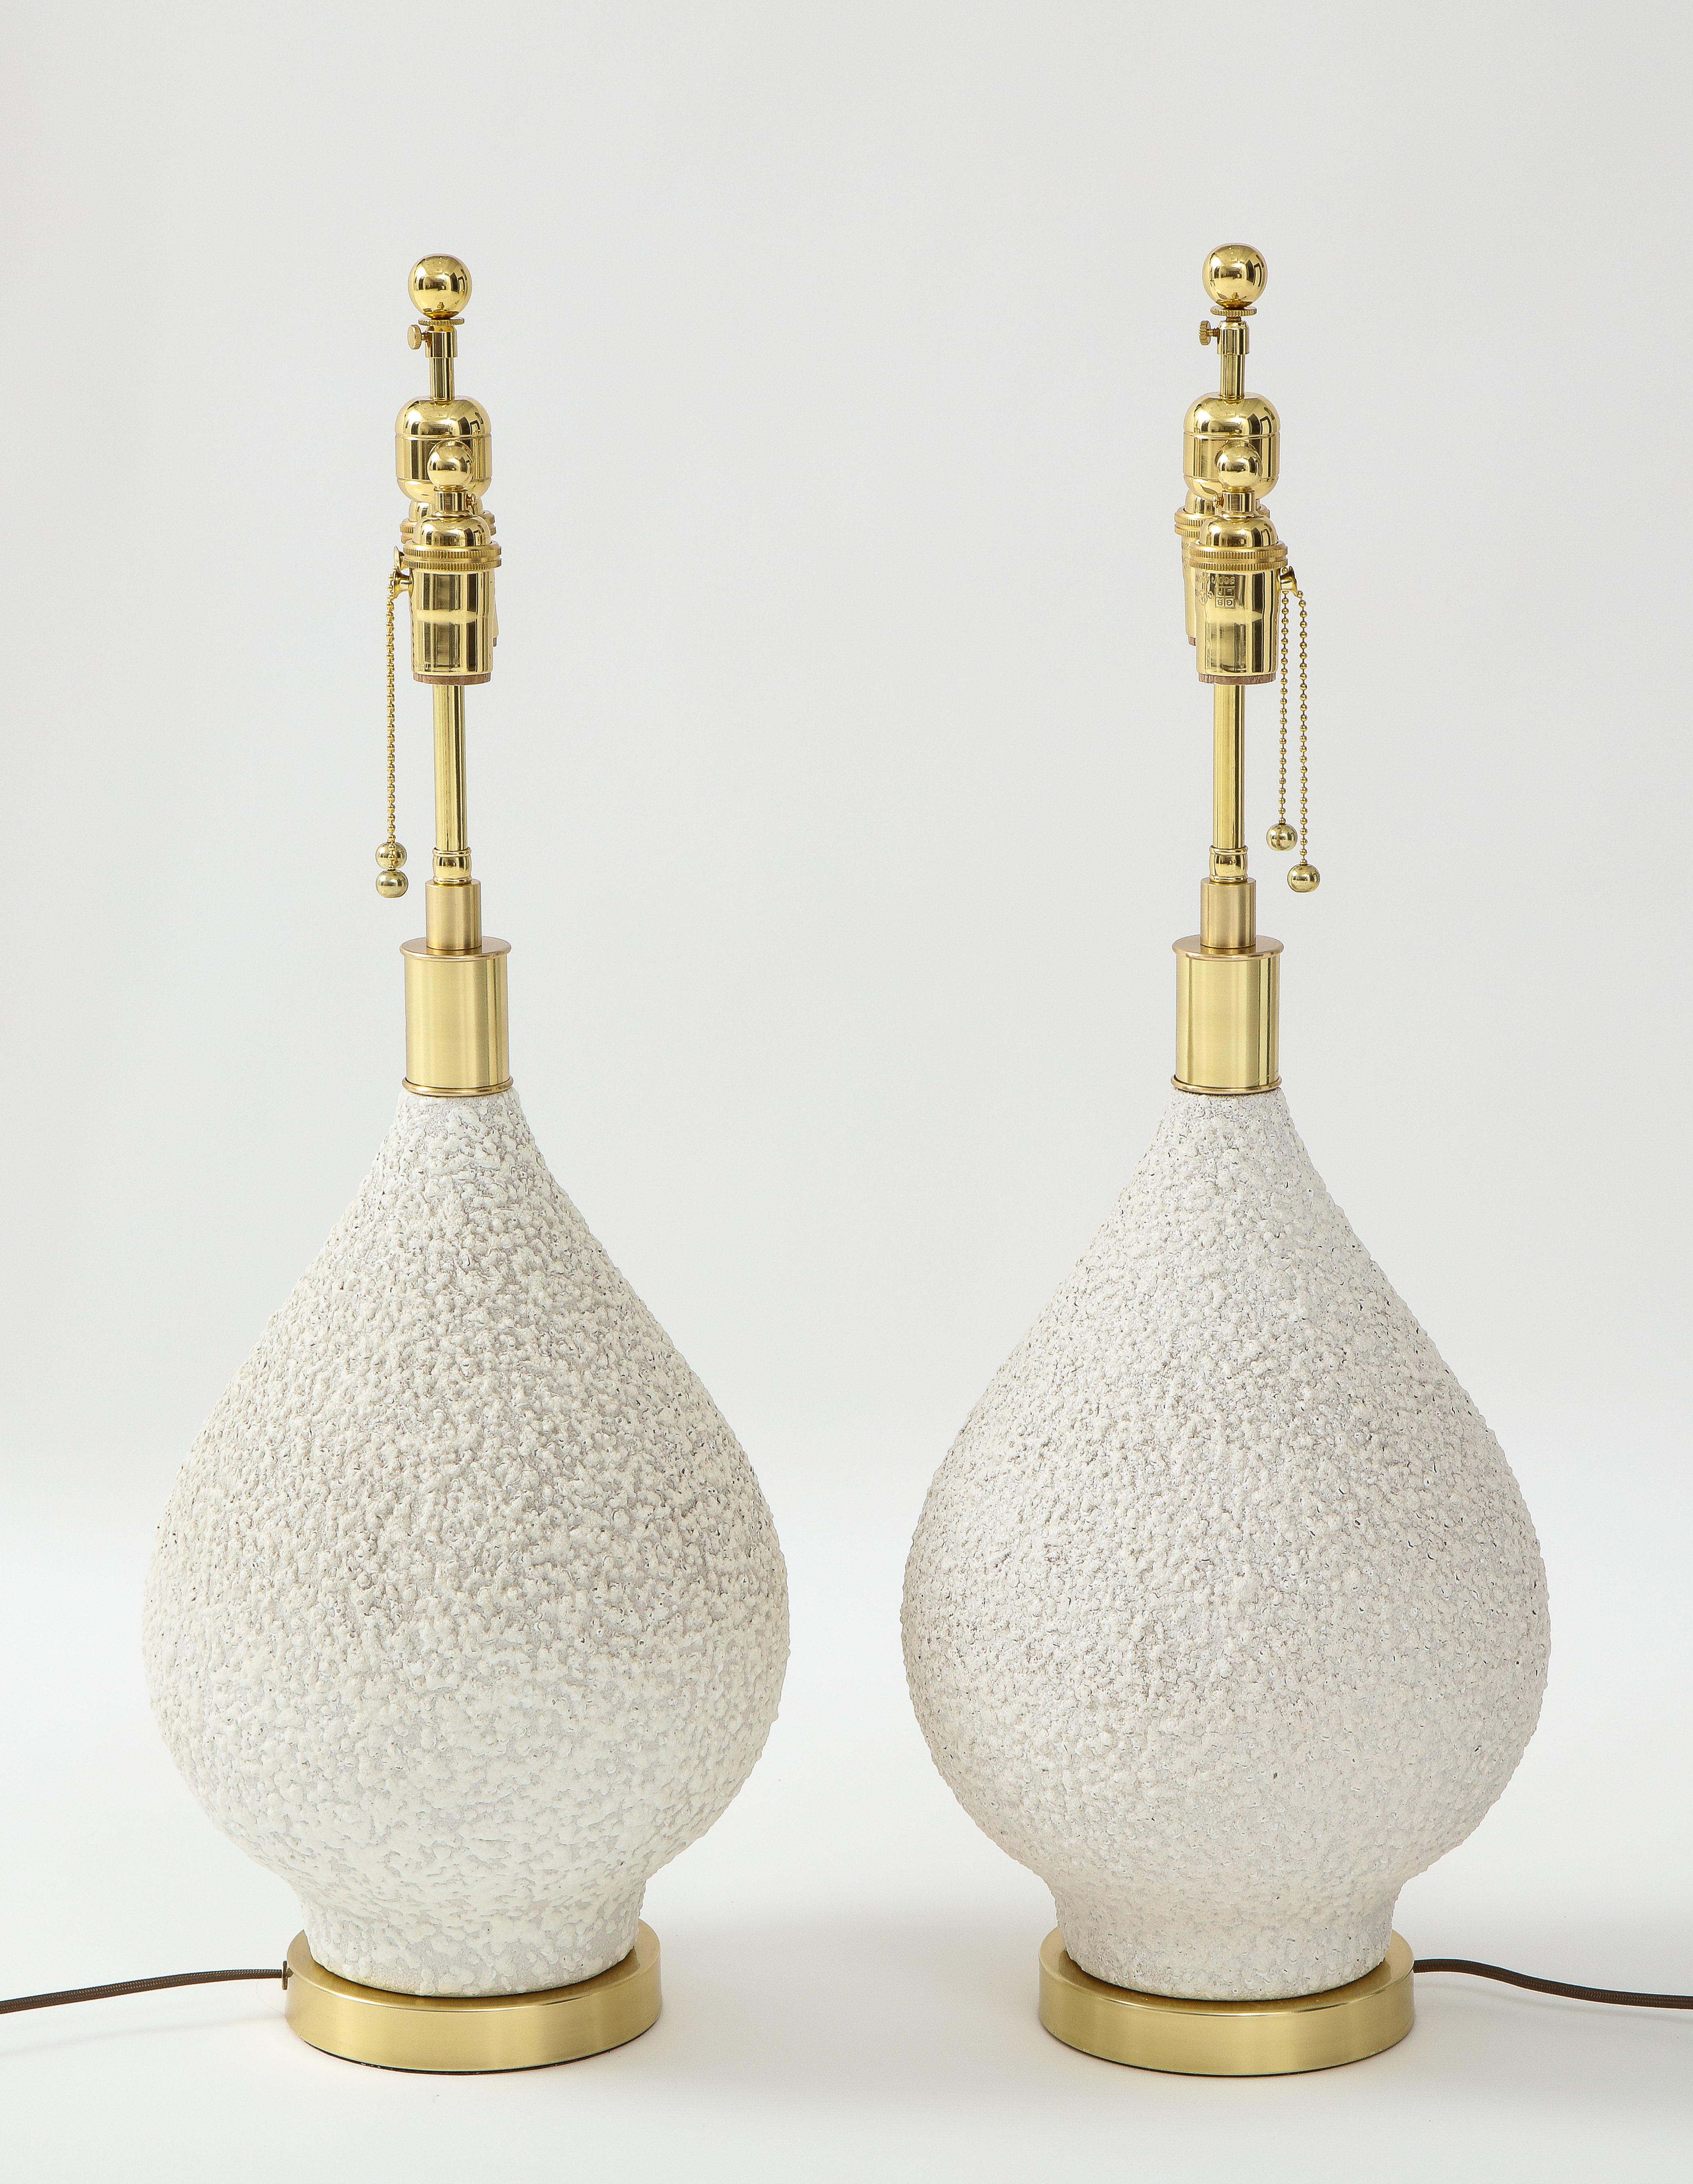 Mid-Century Modern Pair of Pear Shaped Ceramic Lamps